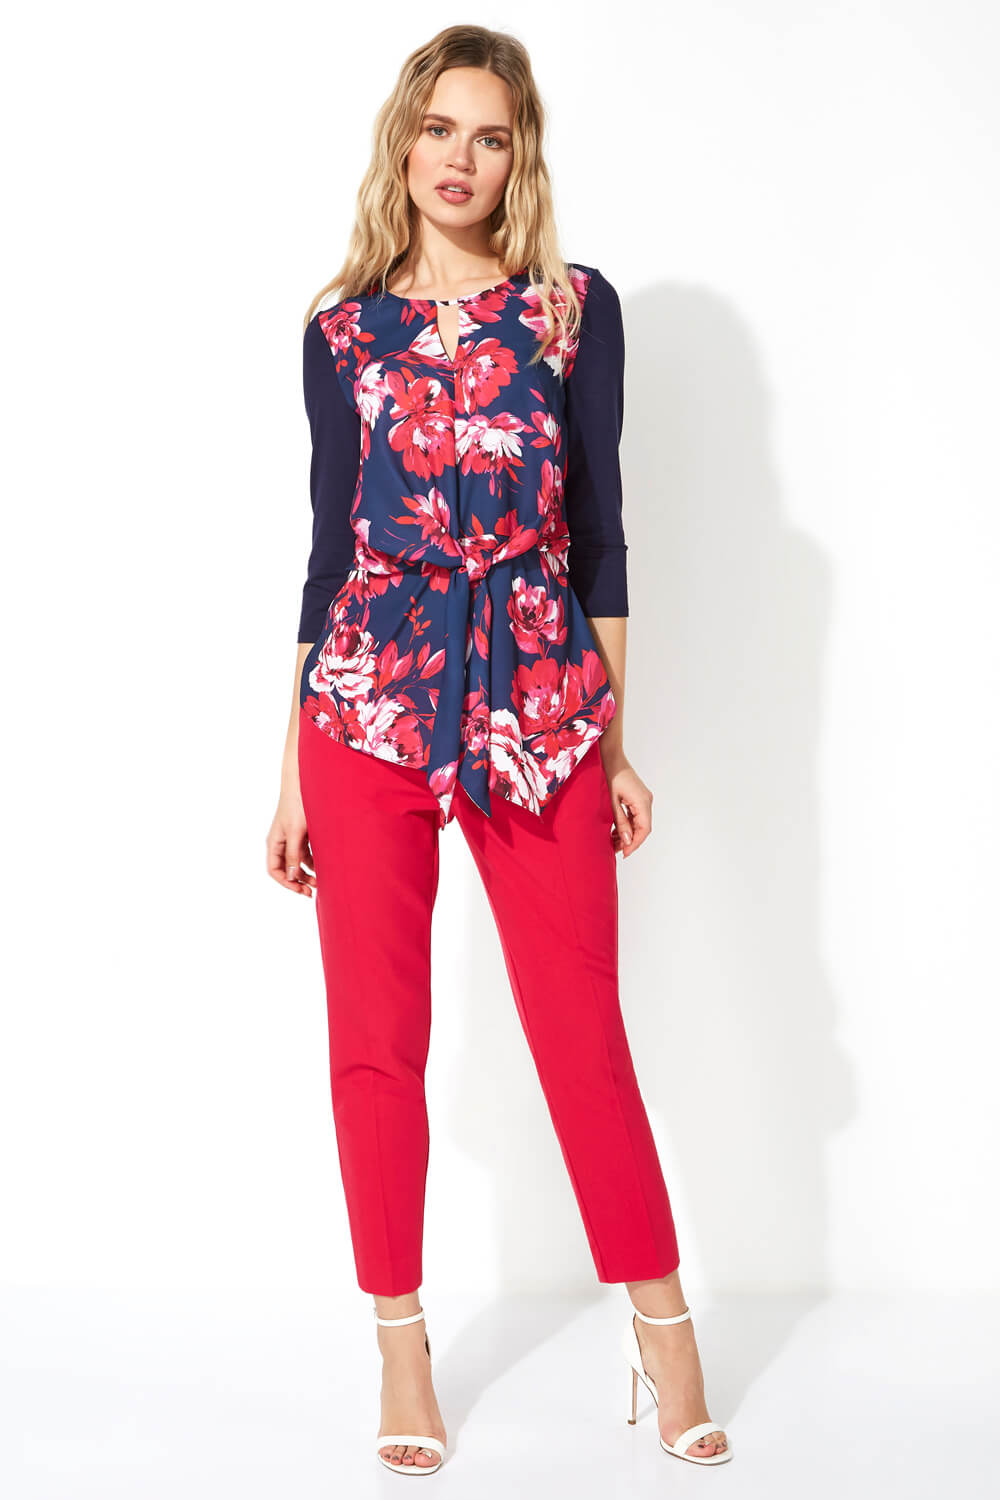 Fuchsia Floral Tie Front Keyhole Top, Image 4 of 5